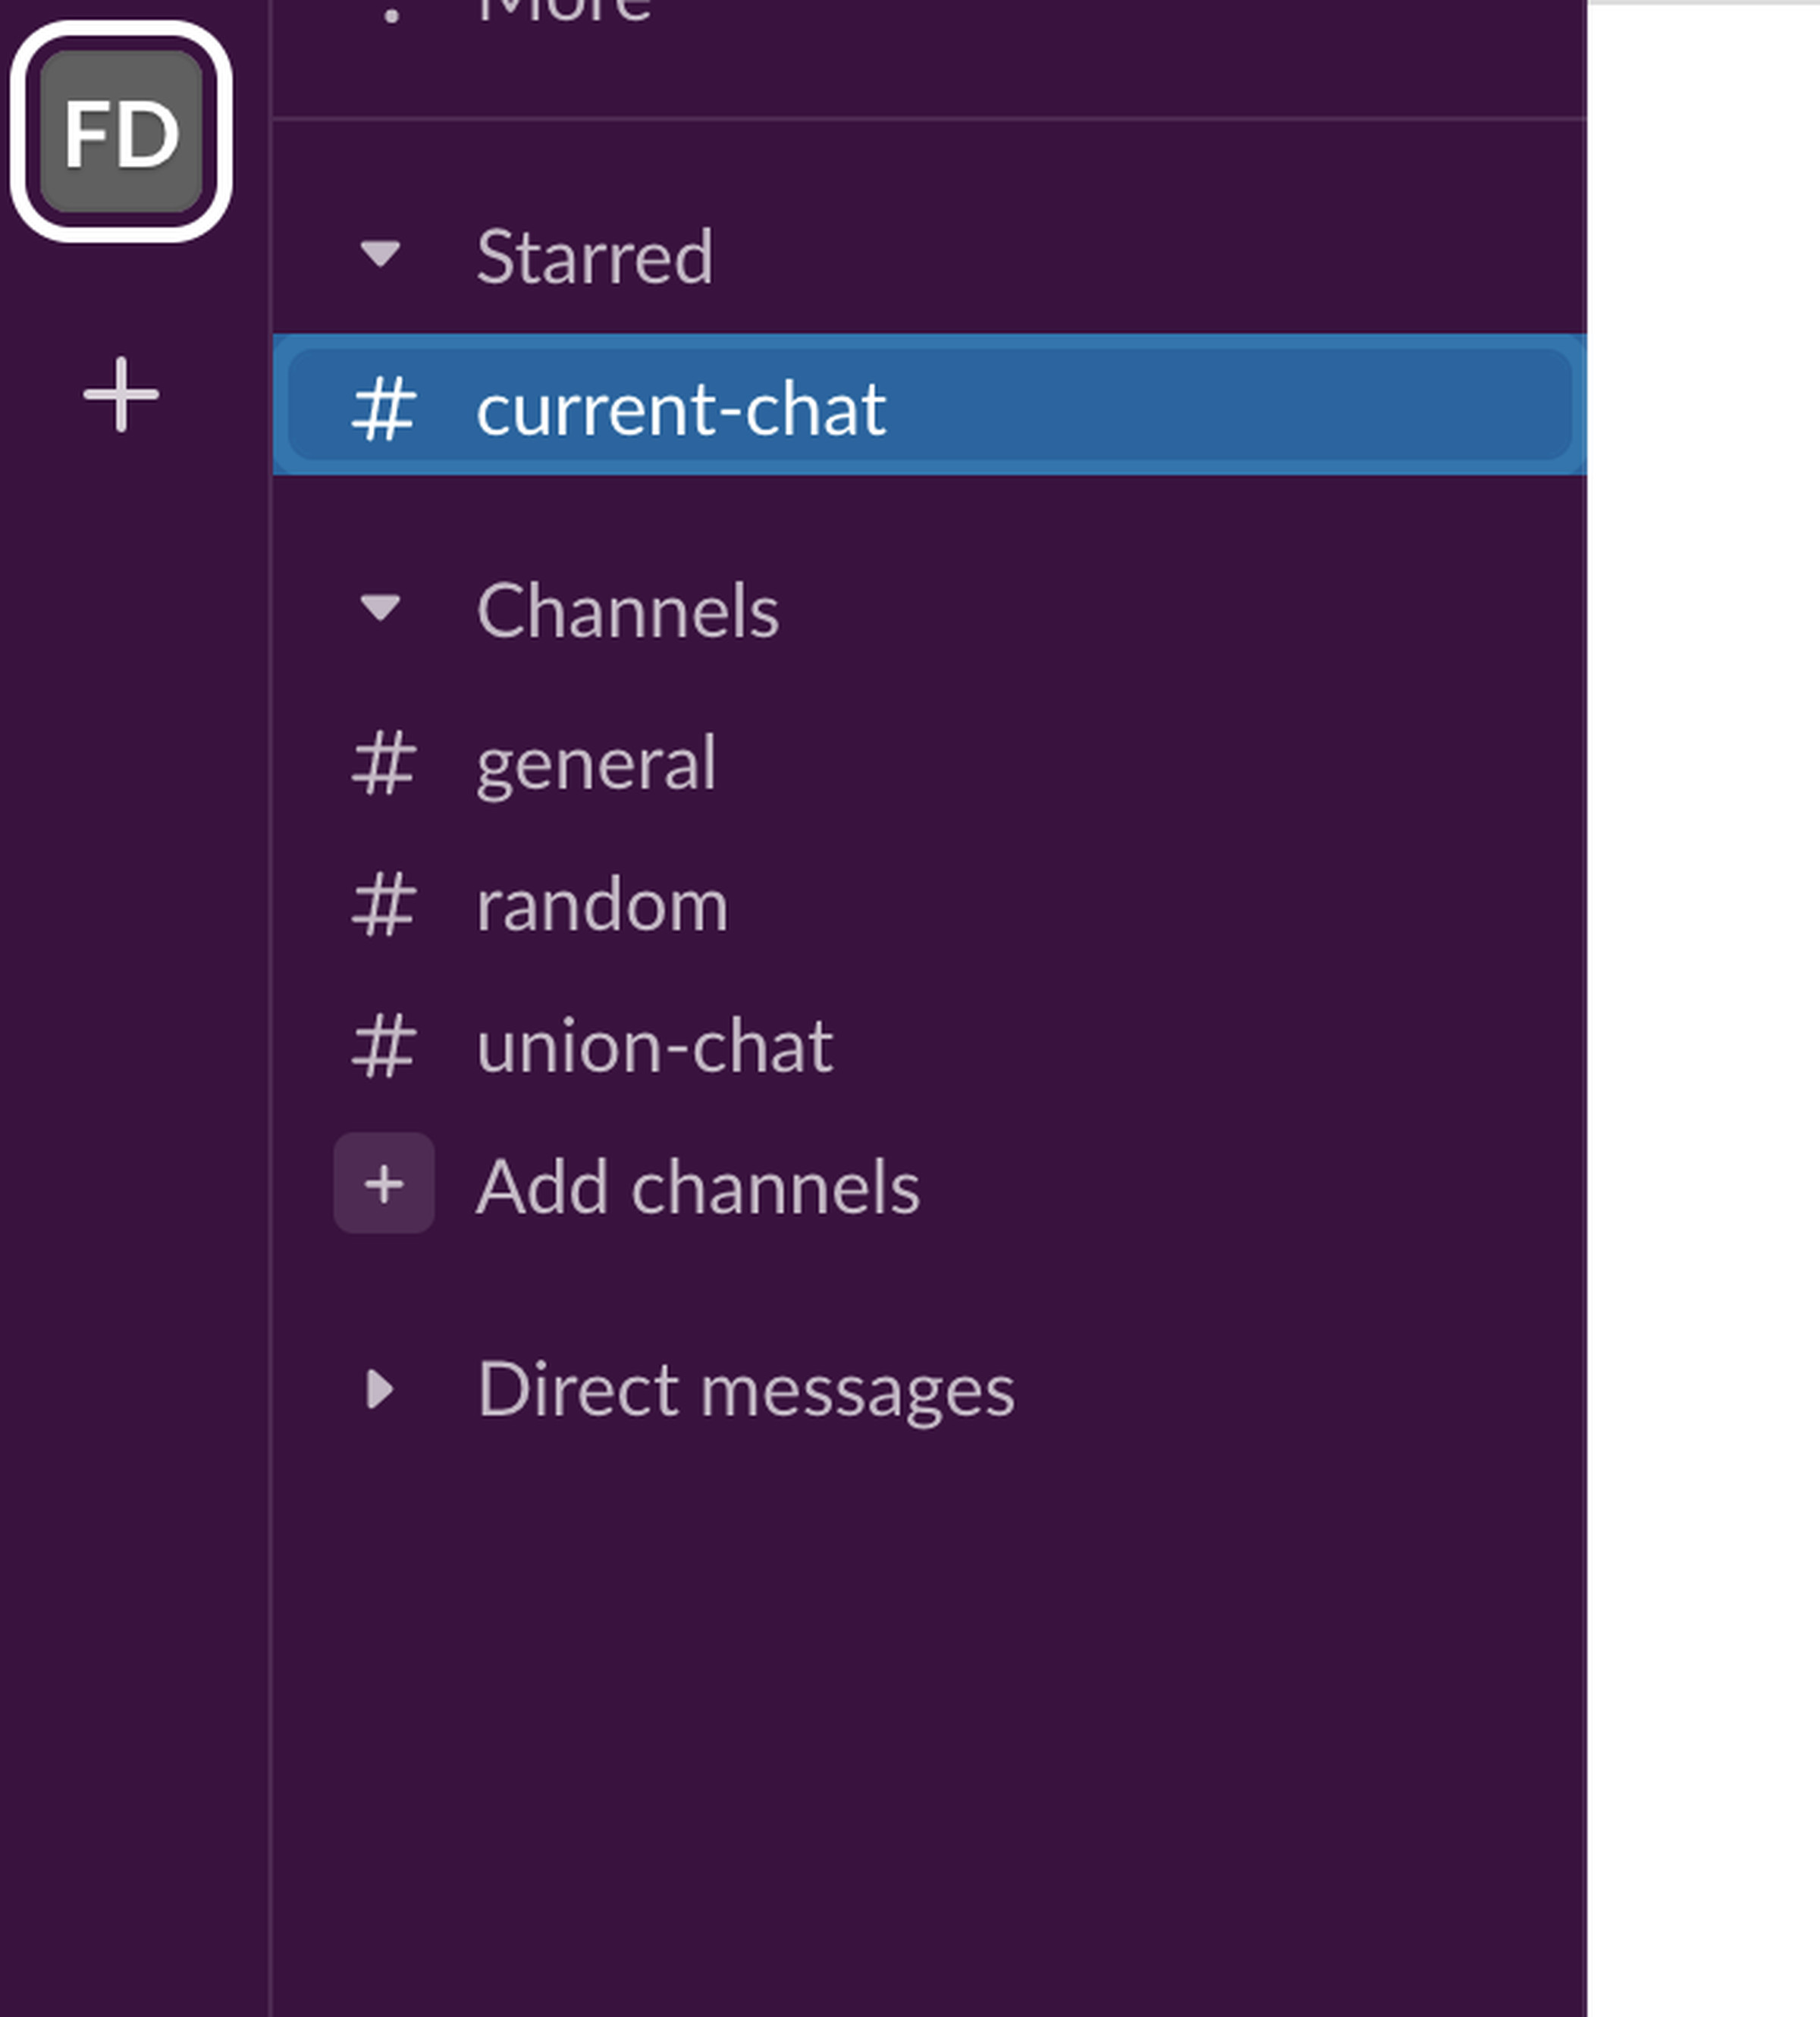 Slack side panel with #current-chat moved to the Starred category.